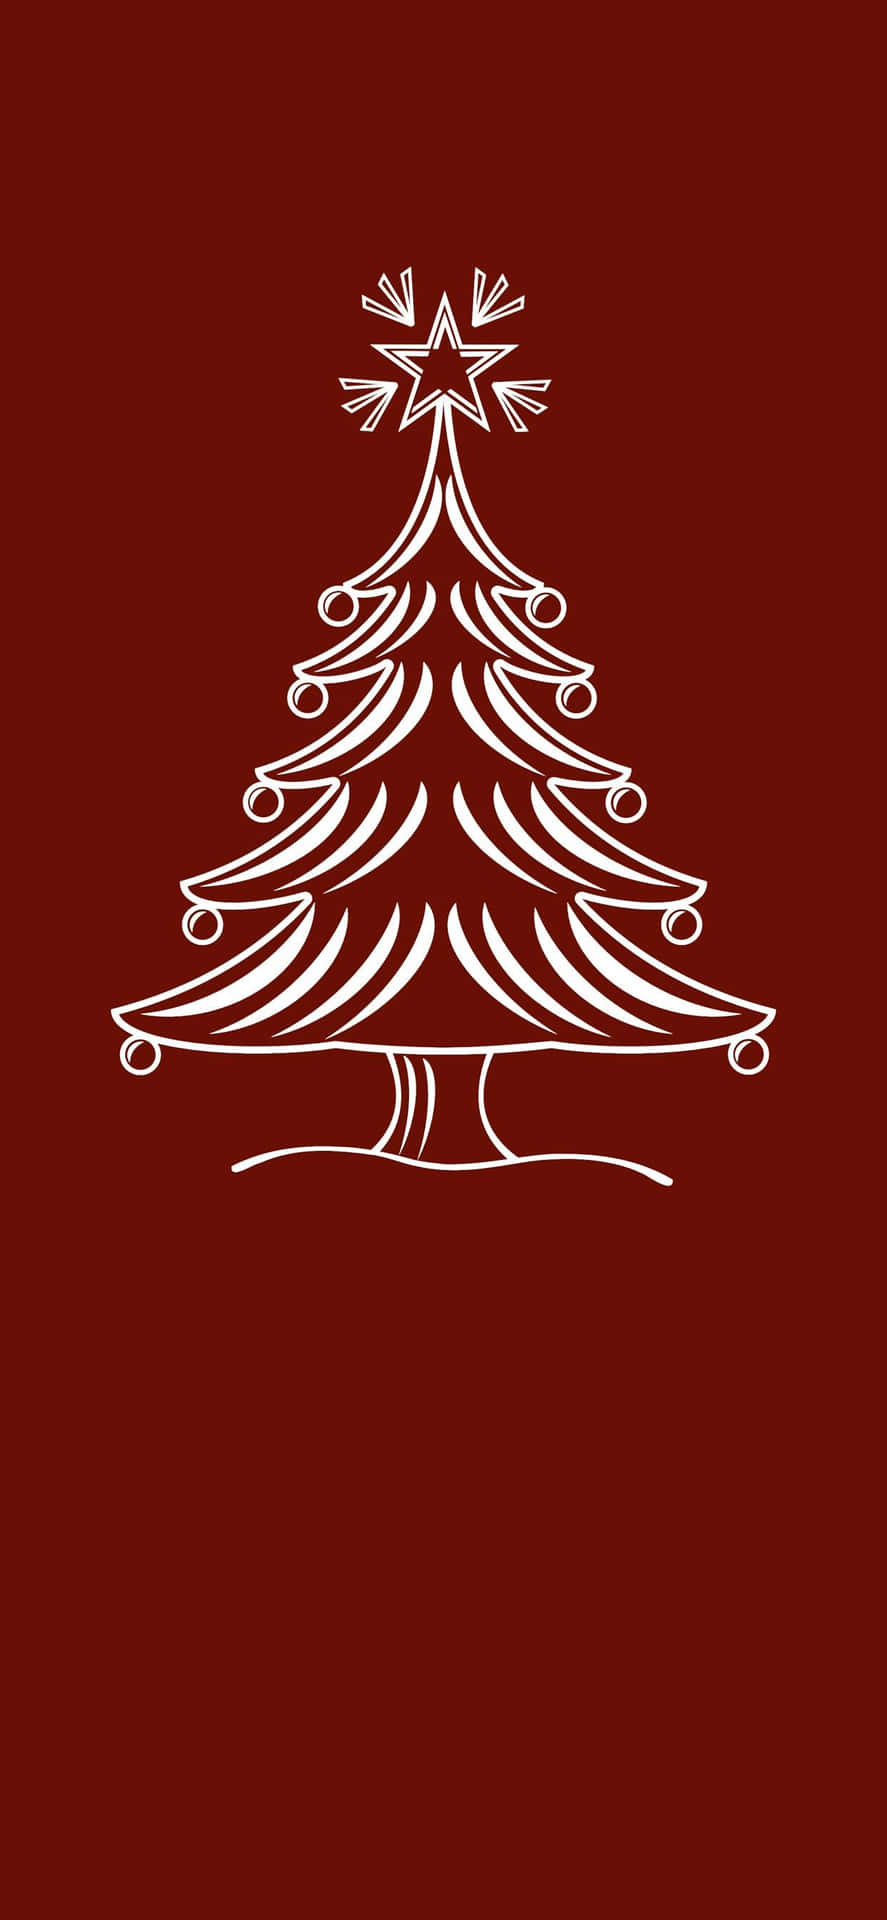 Get Ready for the Holidays with a Red Christmas Iphone! Wallpaper